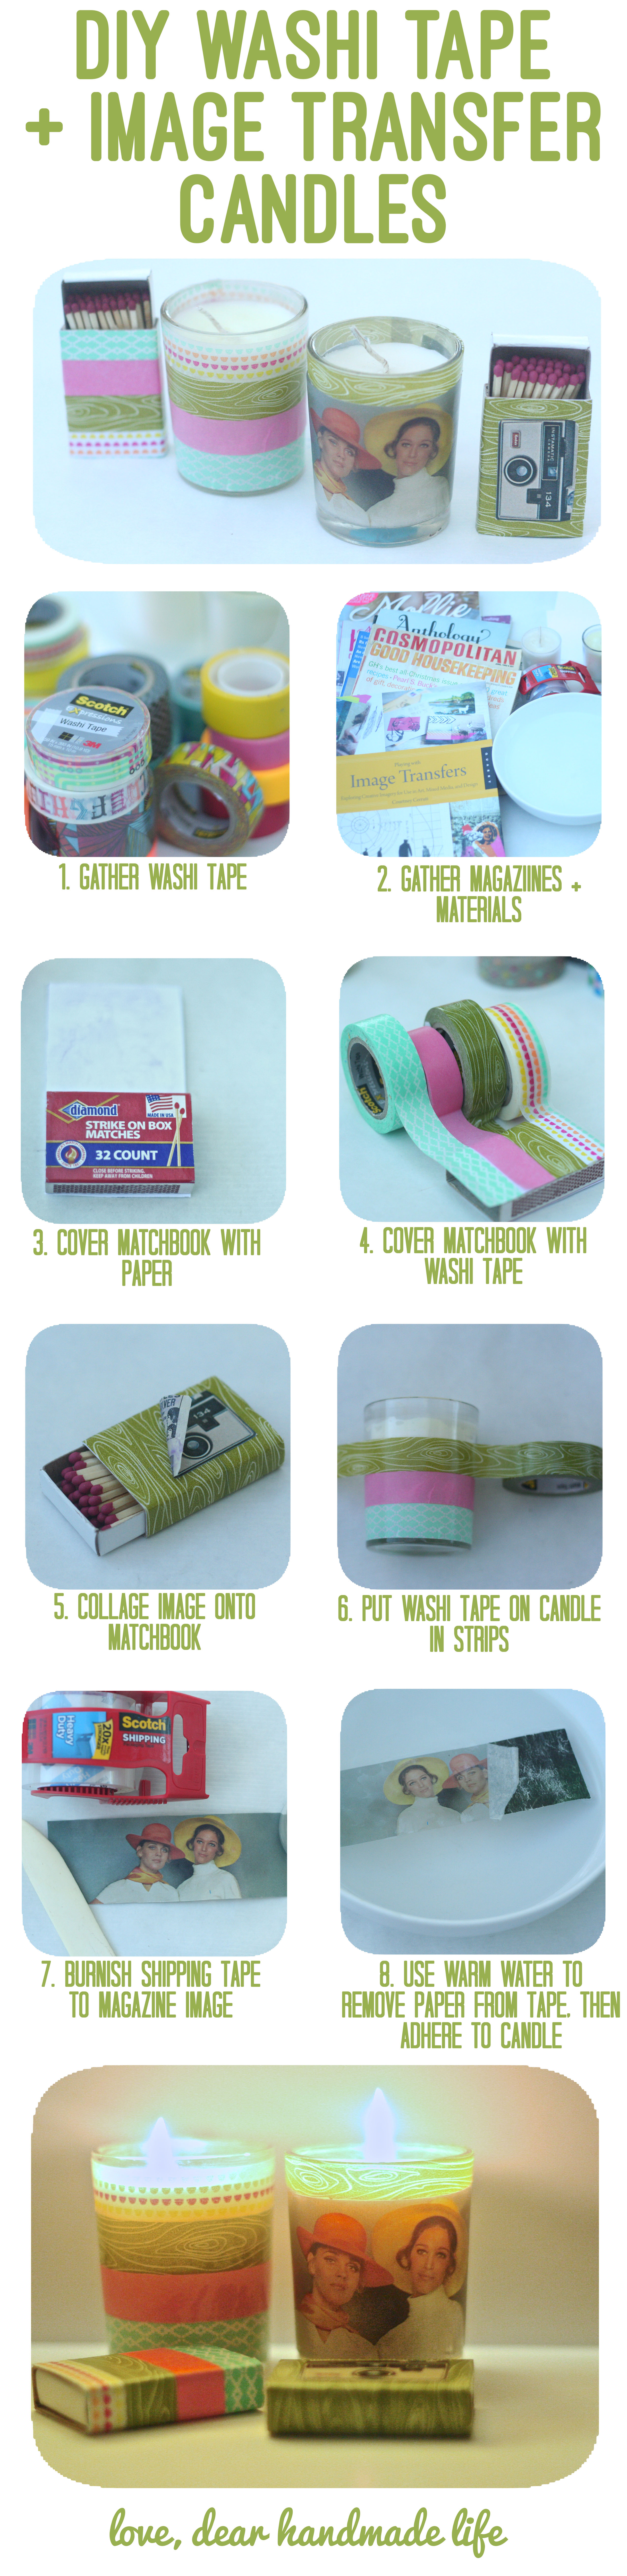 dear-handmade-life-how-to-decorate-image-transfer-washi-tape-craft-diy-collage